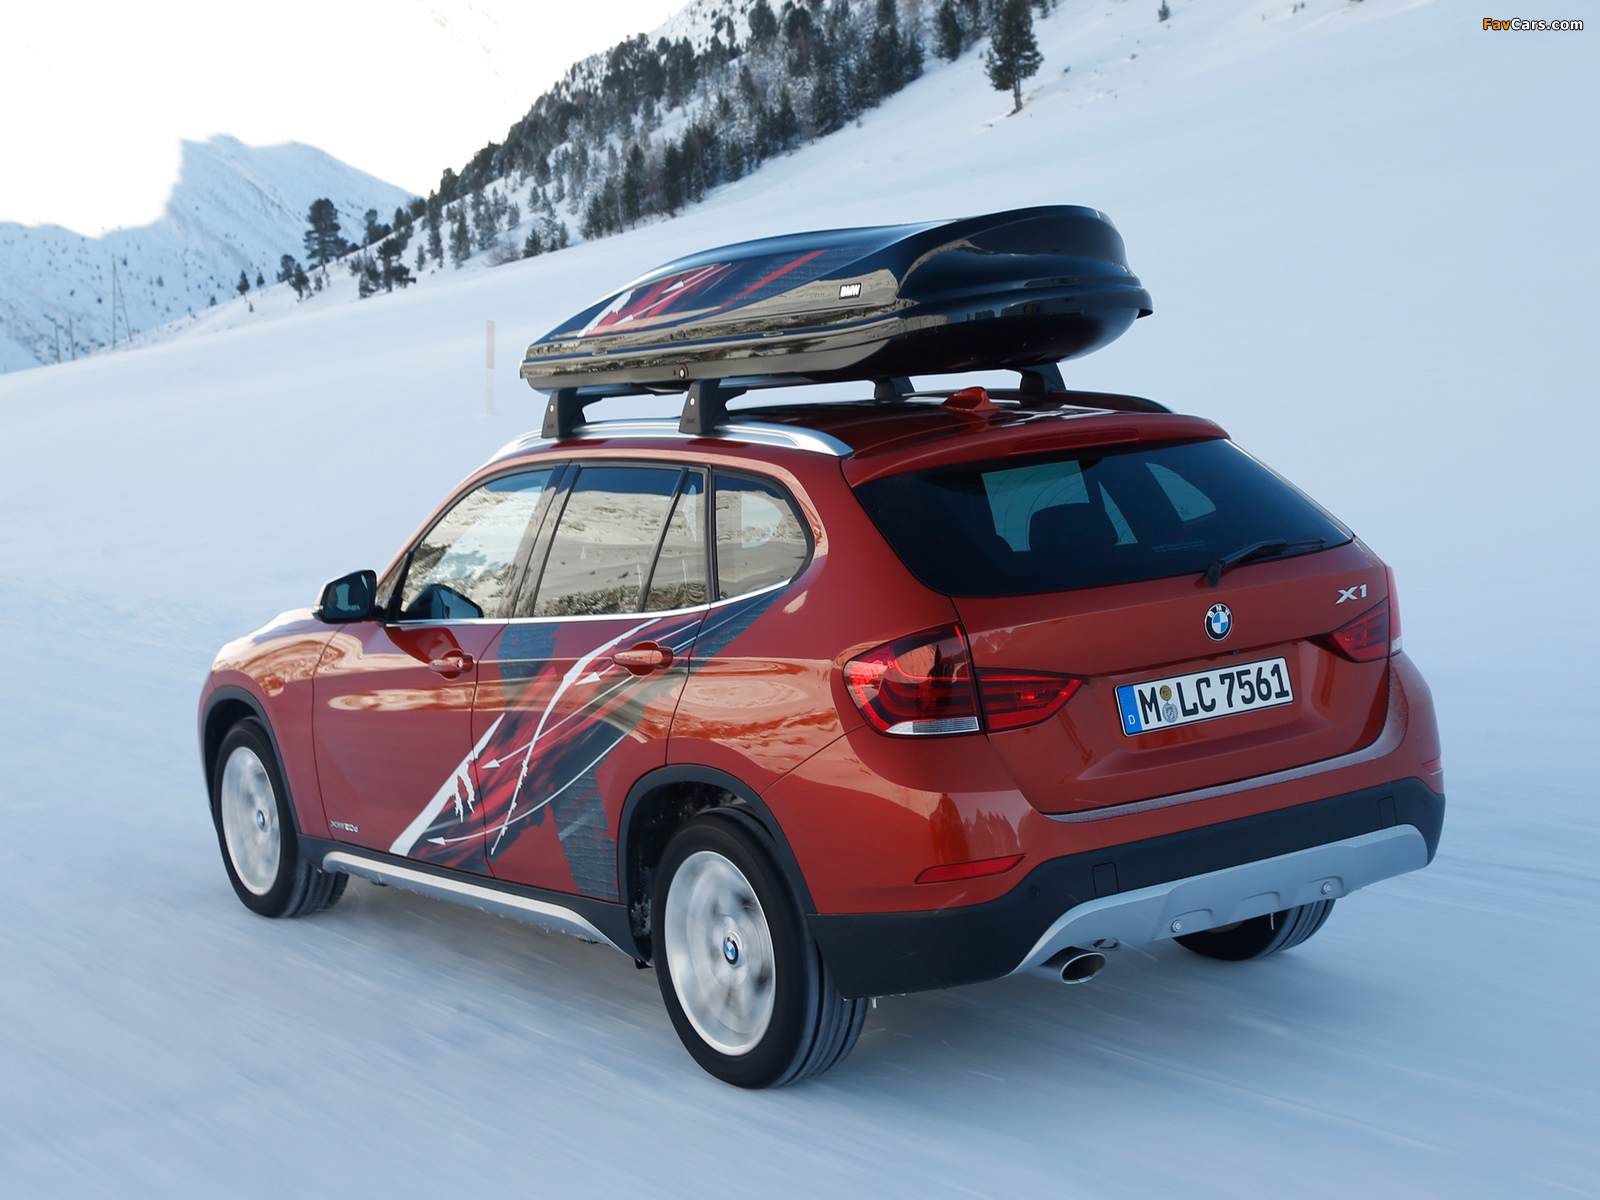 BMW X1 Powder Ride Edition (E84) 2012 pictures (1600 x 1200)